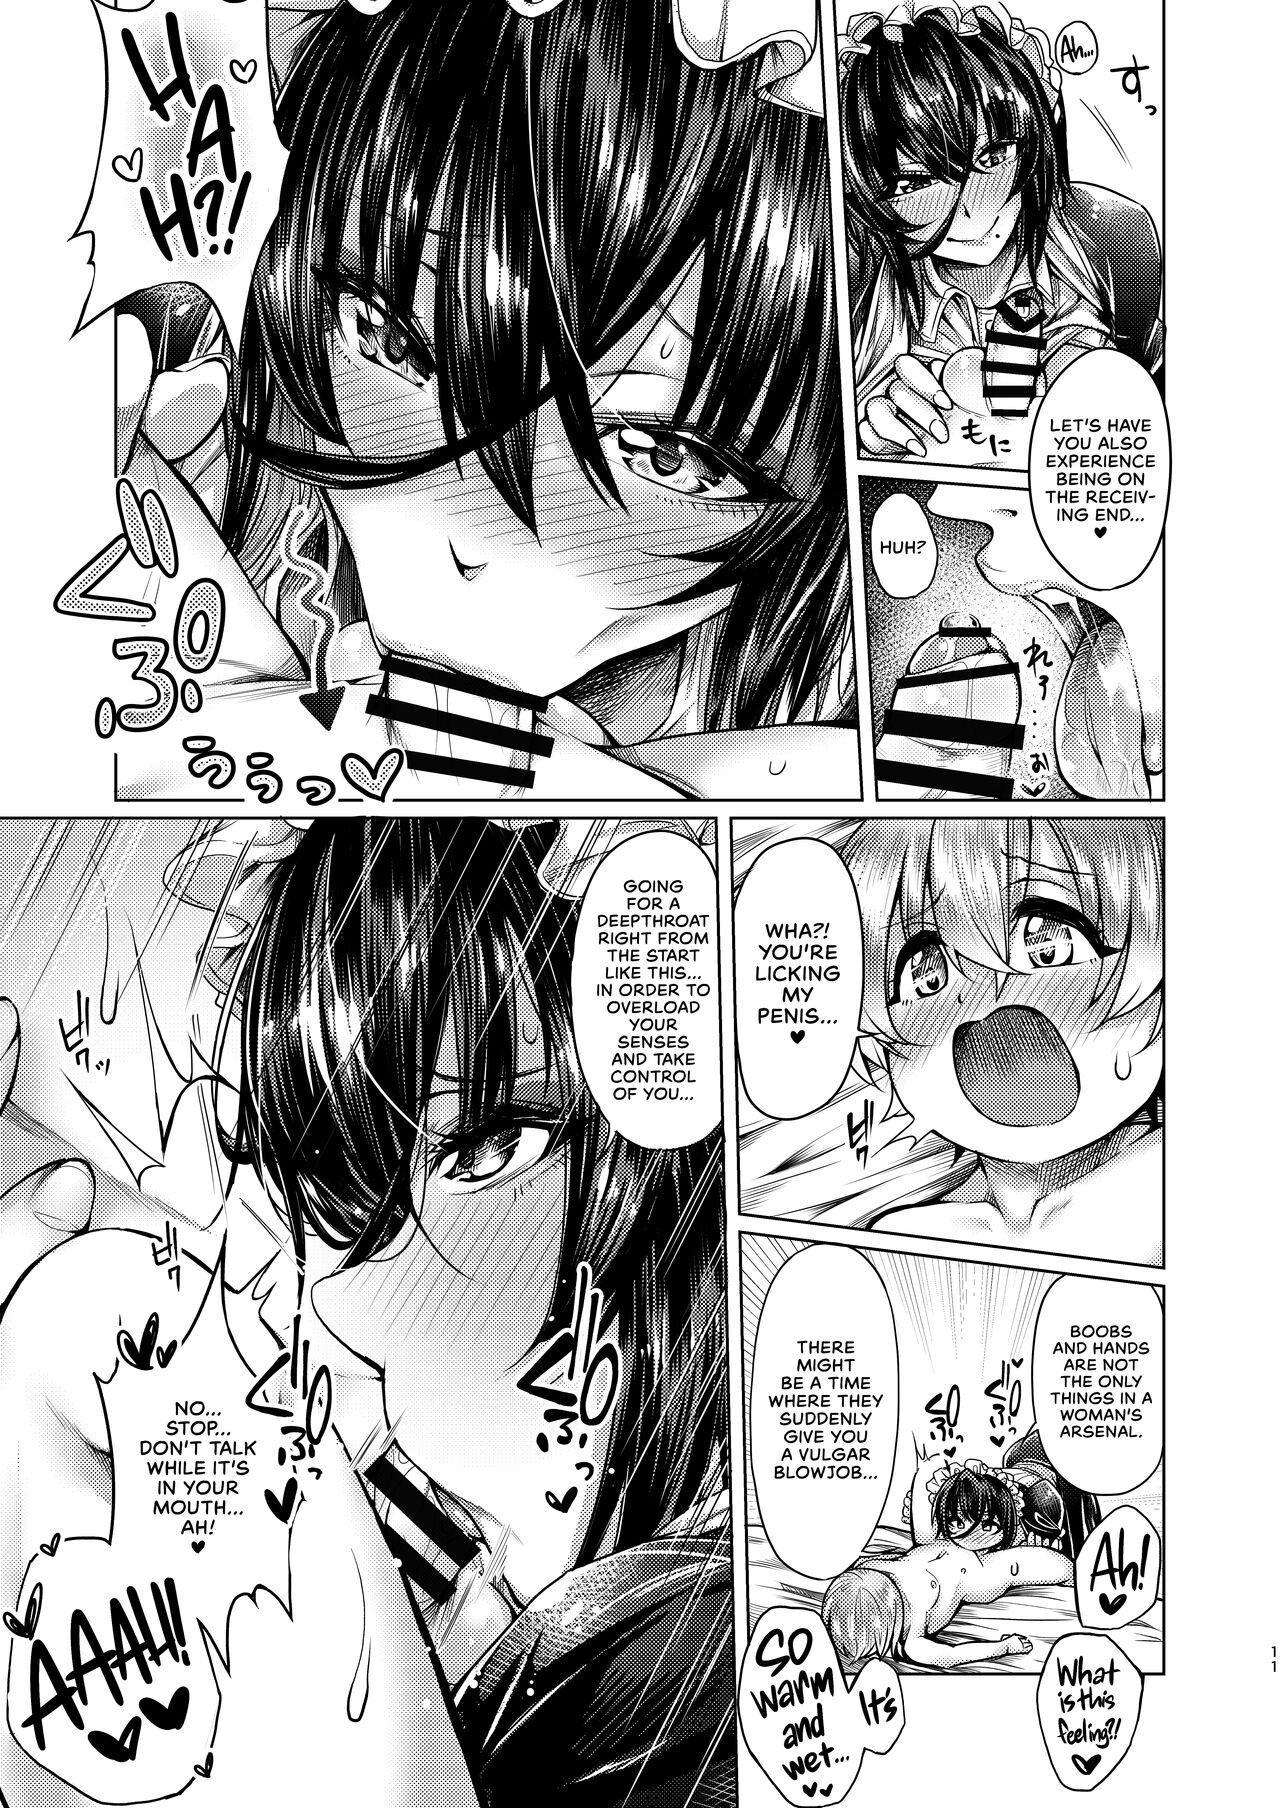 Shota to Maid. - A young boy and his maid 10